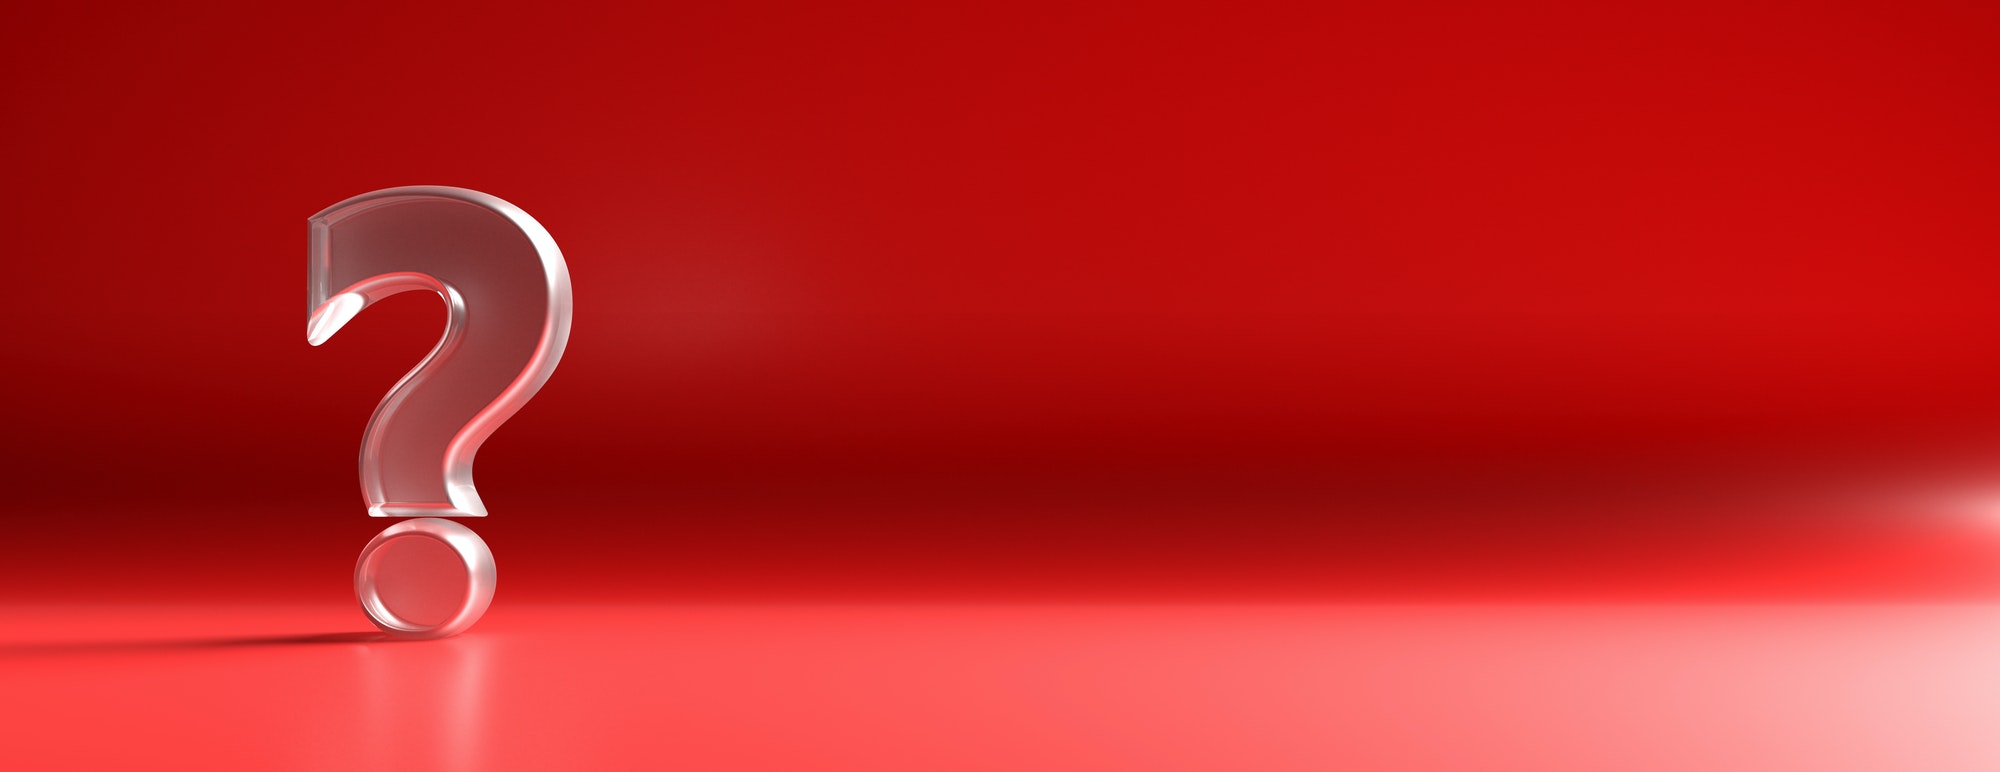 Exclamation mark on red background. 3d illustration